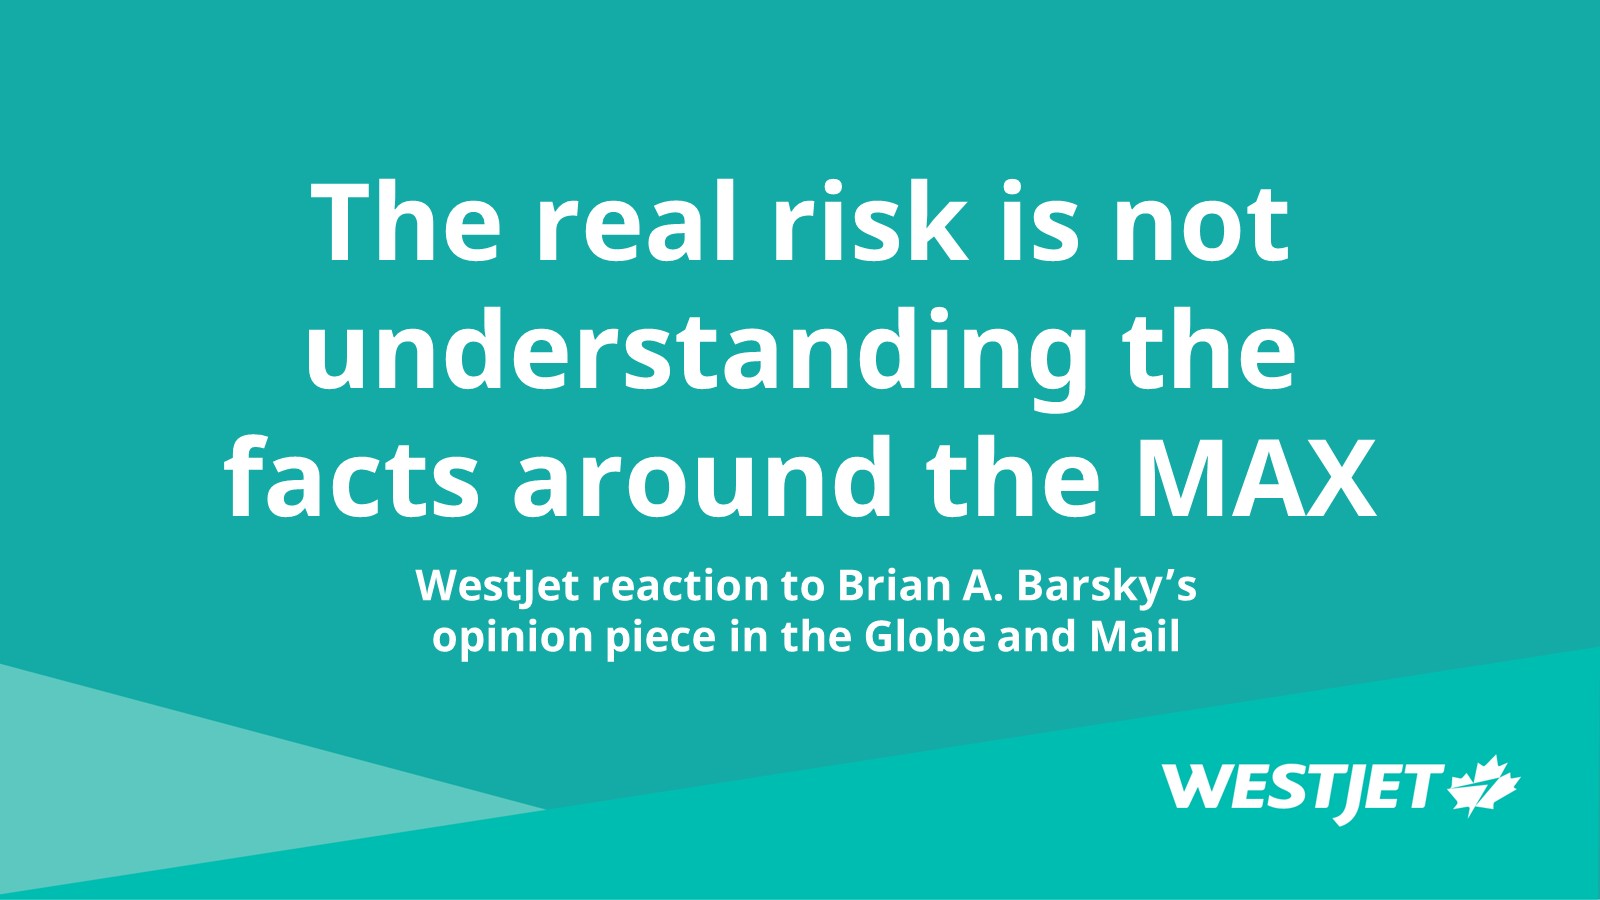 The real risk is not understanding the facts around the MAX